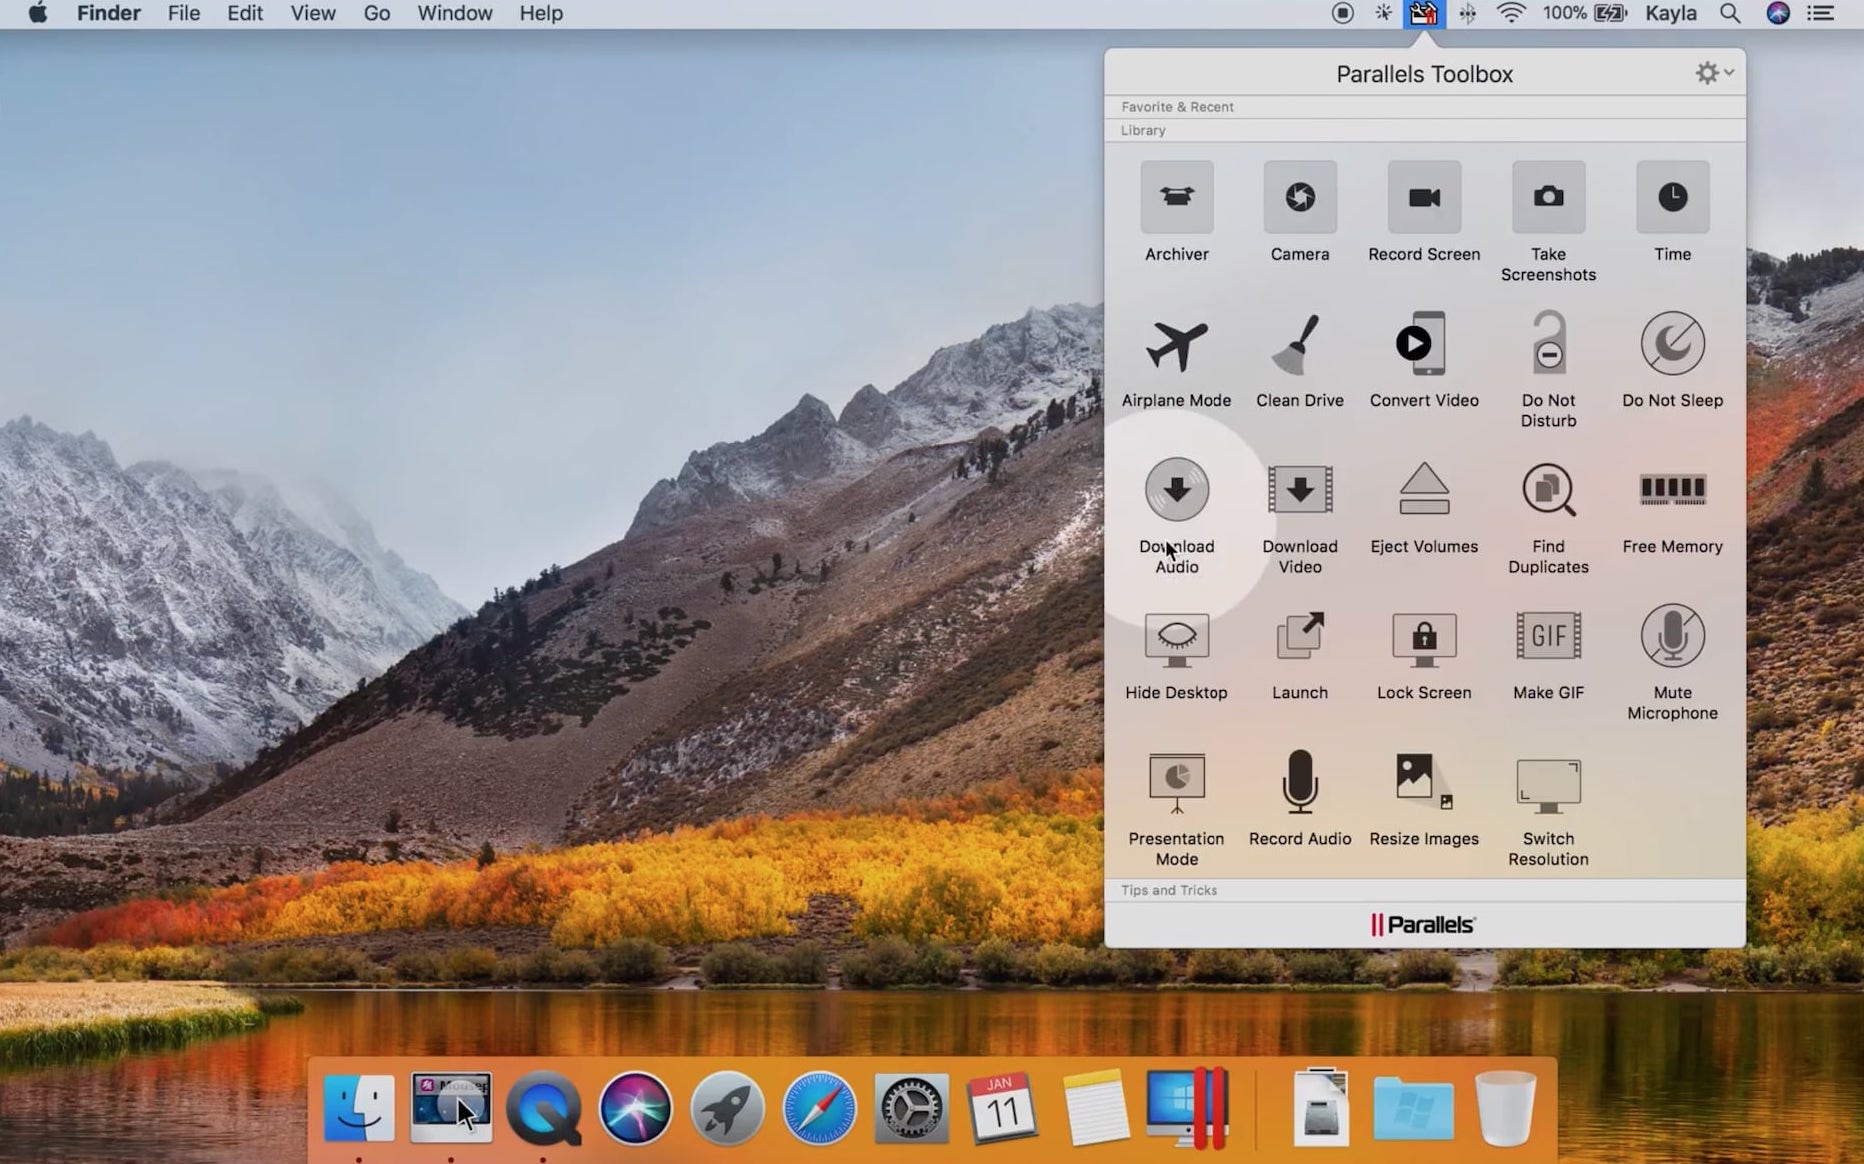 Parallels Toolbox Packs bring useful features to your Mac's menu bar